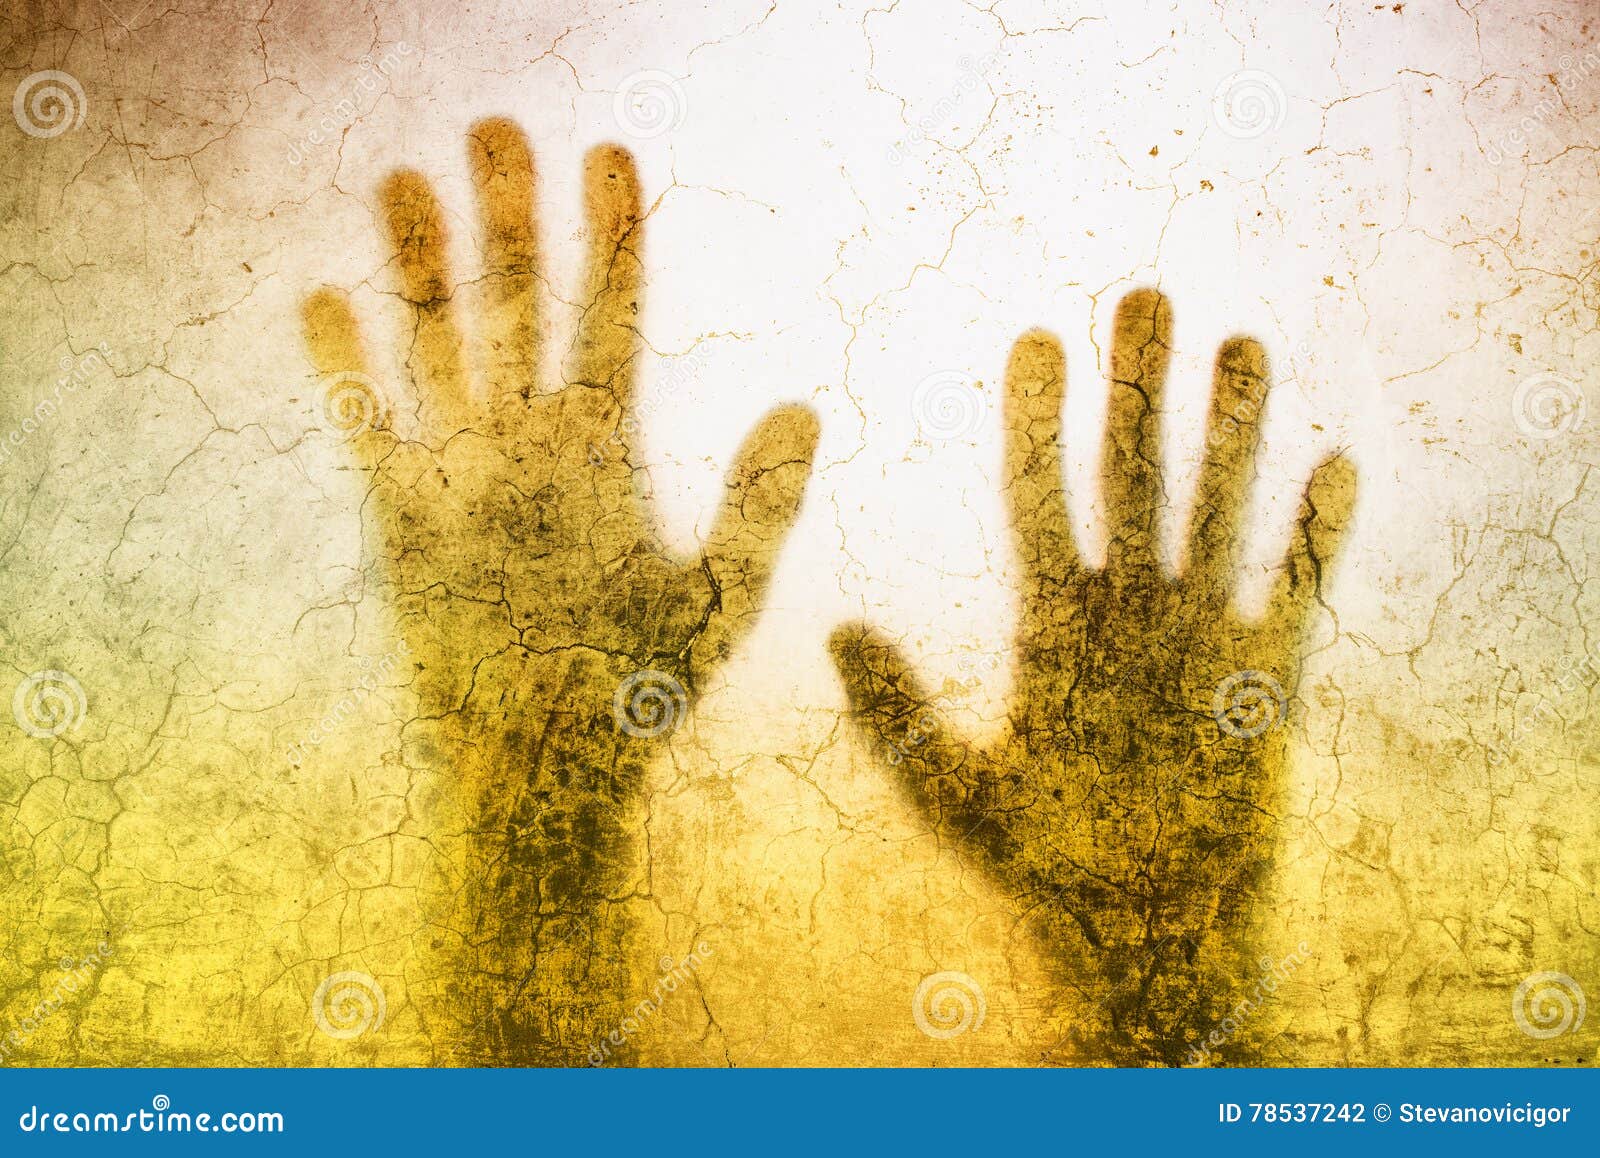 back lit silhouette of trapped person hands behind matte glass